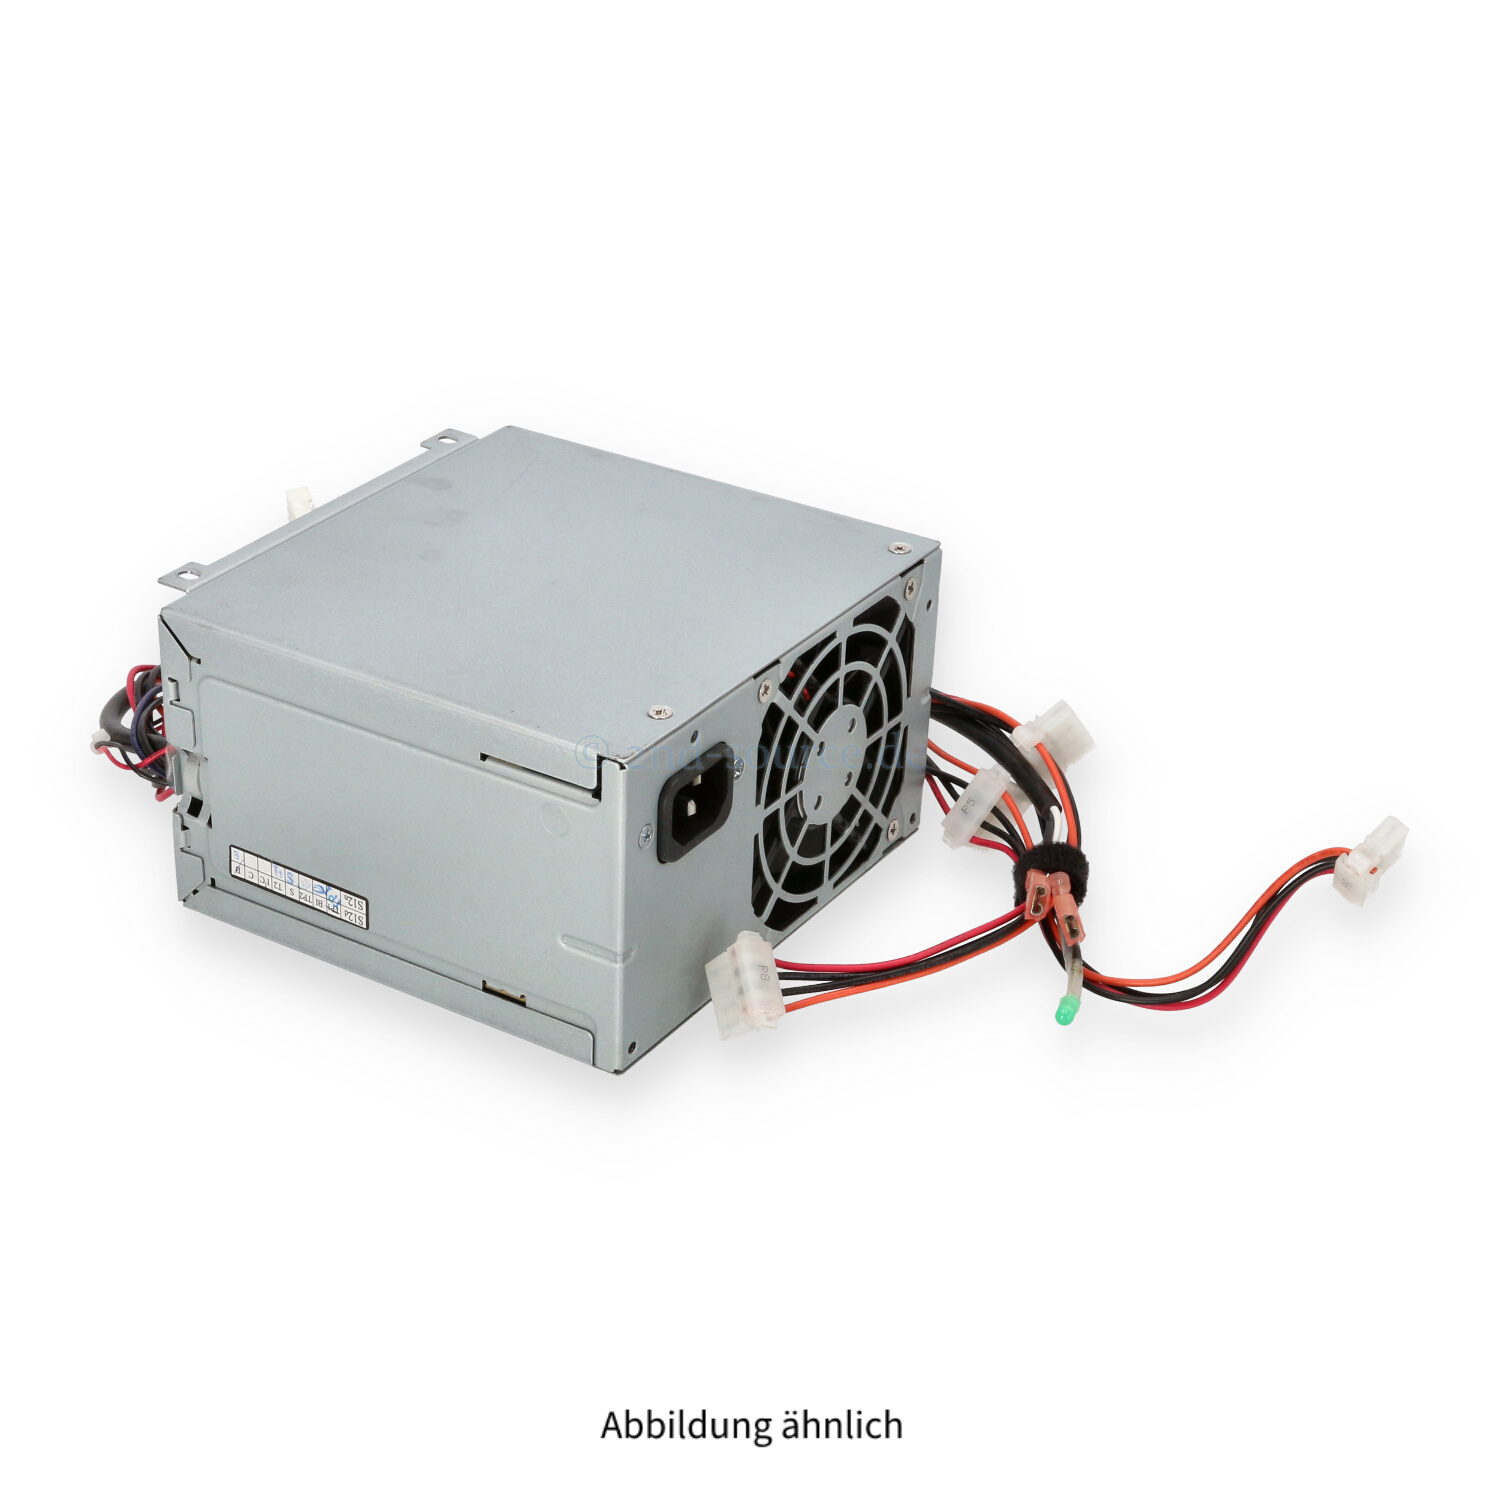 HPE 195W Power Supply DPS-200PB-129 A 406402-001